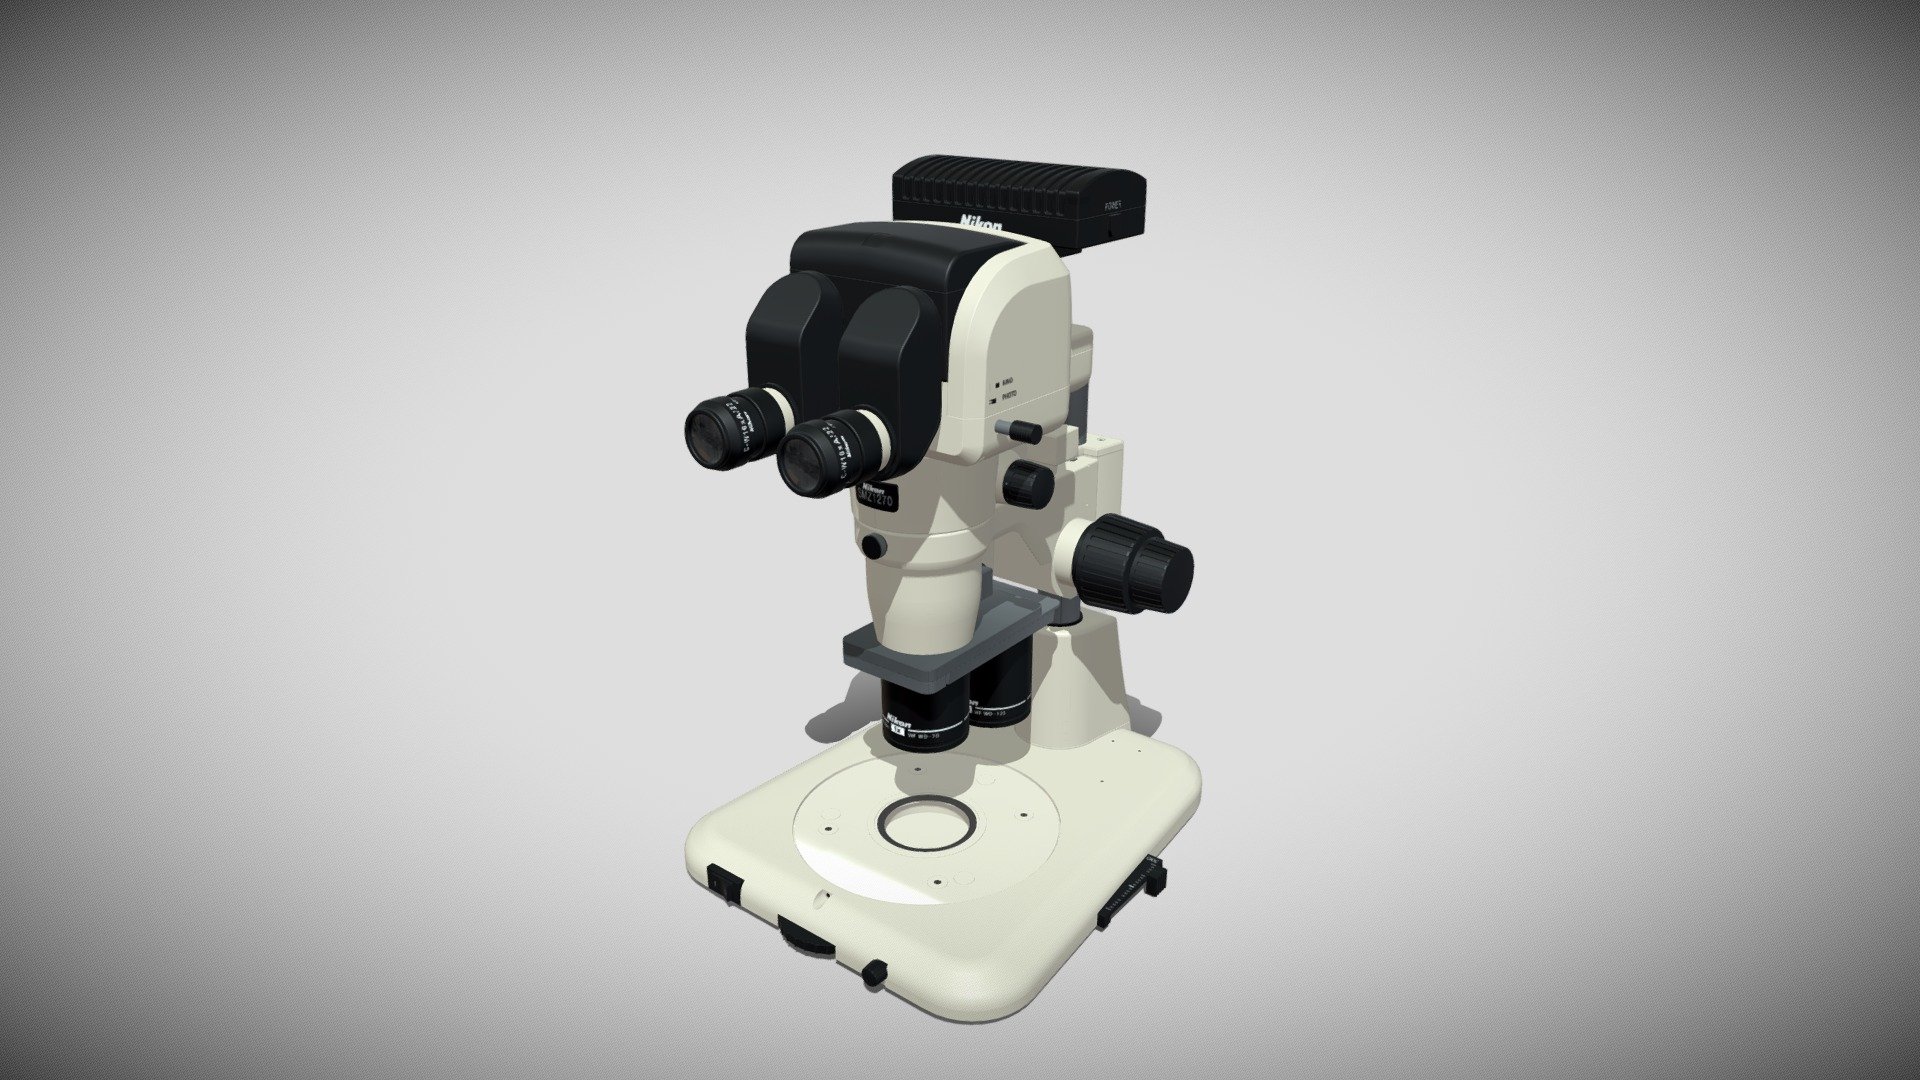 Detailed model of a Nikon SMZ1270i Microscope, modeled in Cinema 4D.The model was created using approximate real world dimensions.

The model has 102,804 polys and 101,791 vertices.

An additional file has been provided containing the original Cinema 4D project files with both standard and v-ray materials, textures and other 3d export files such as 3ds, fbx and obj 3d model